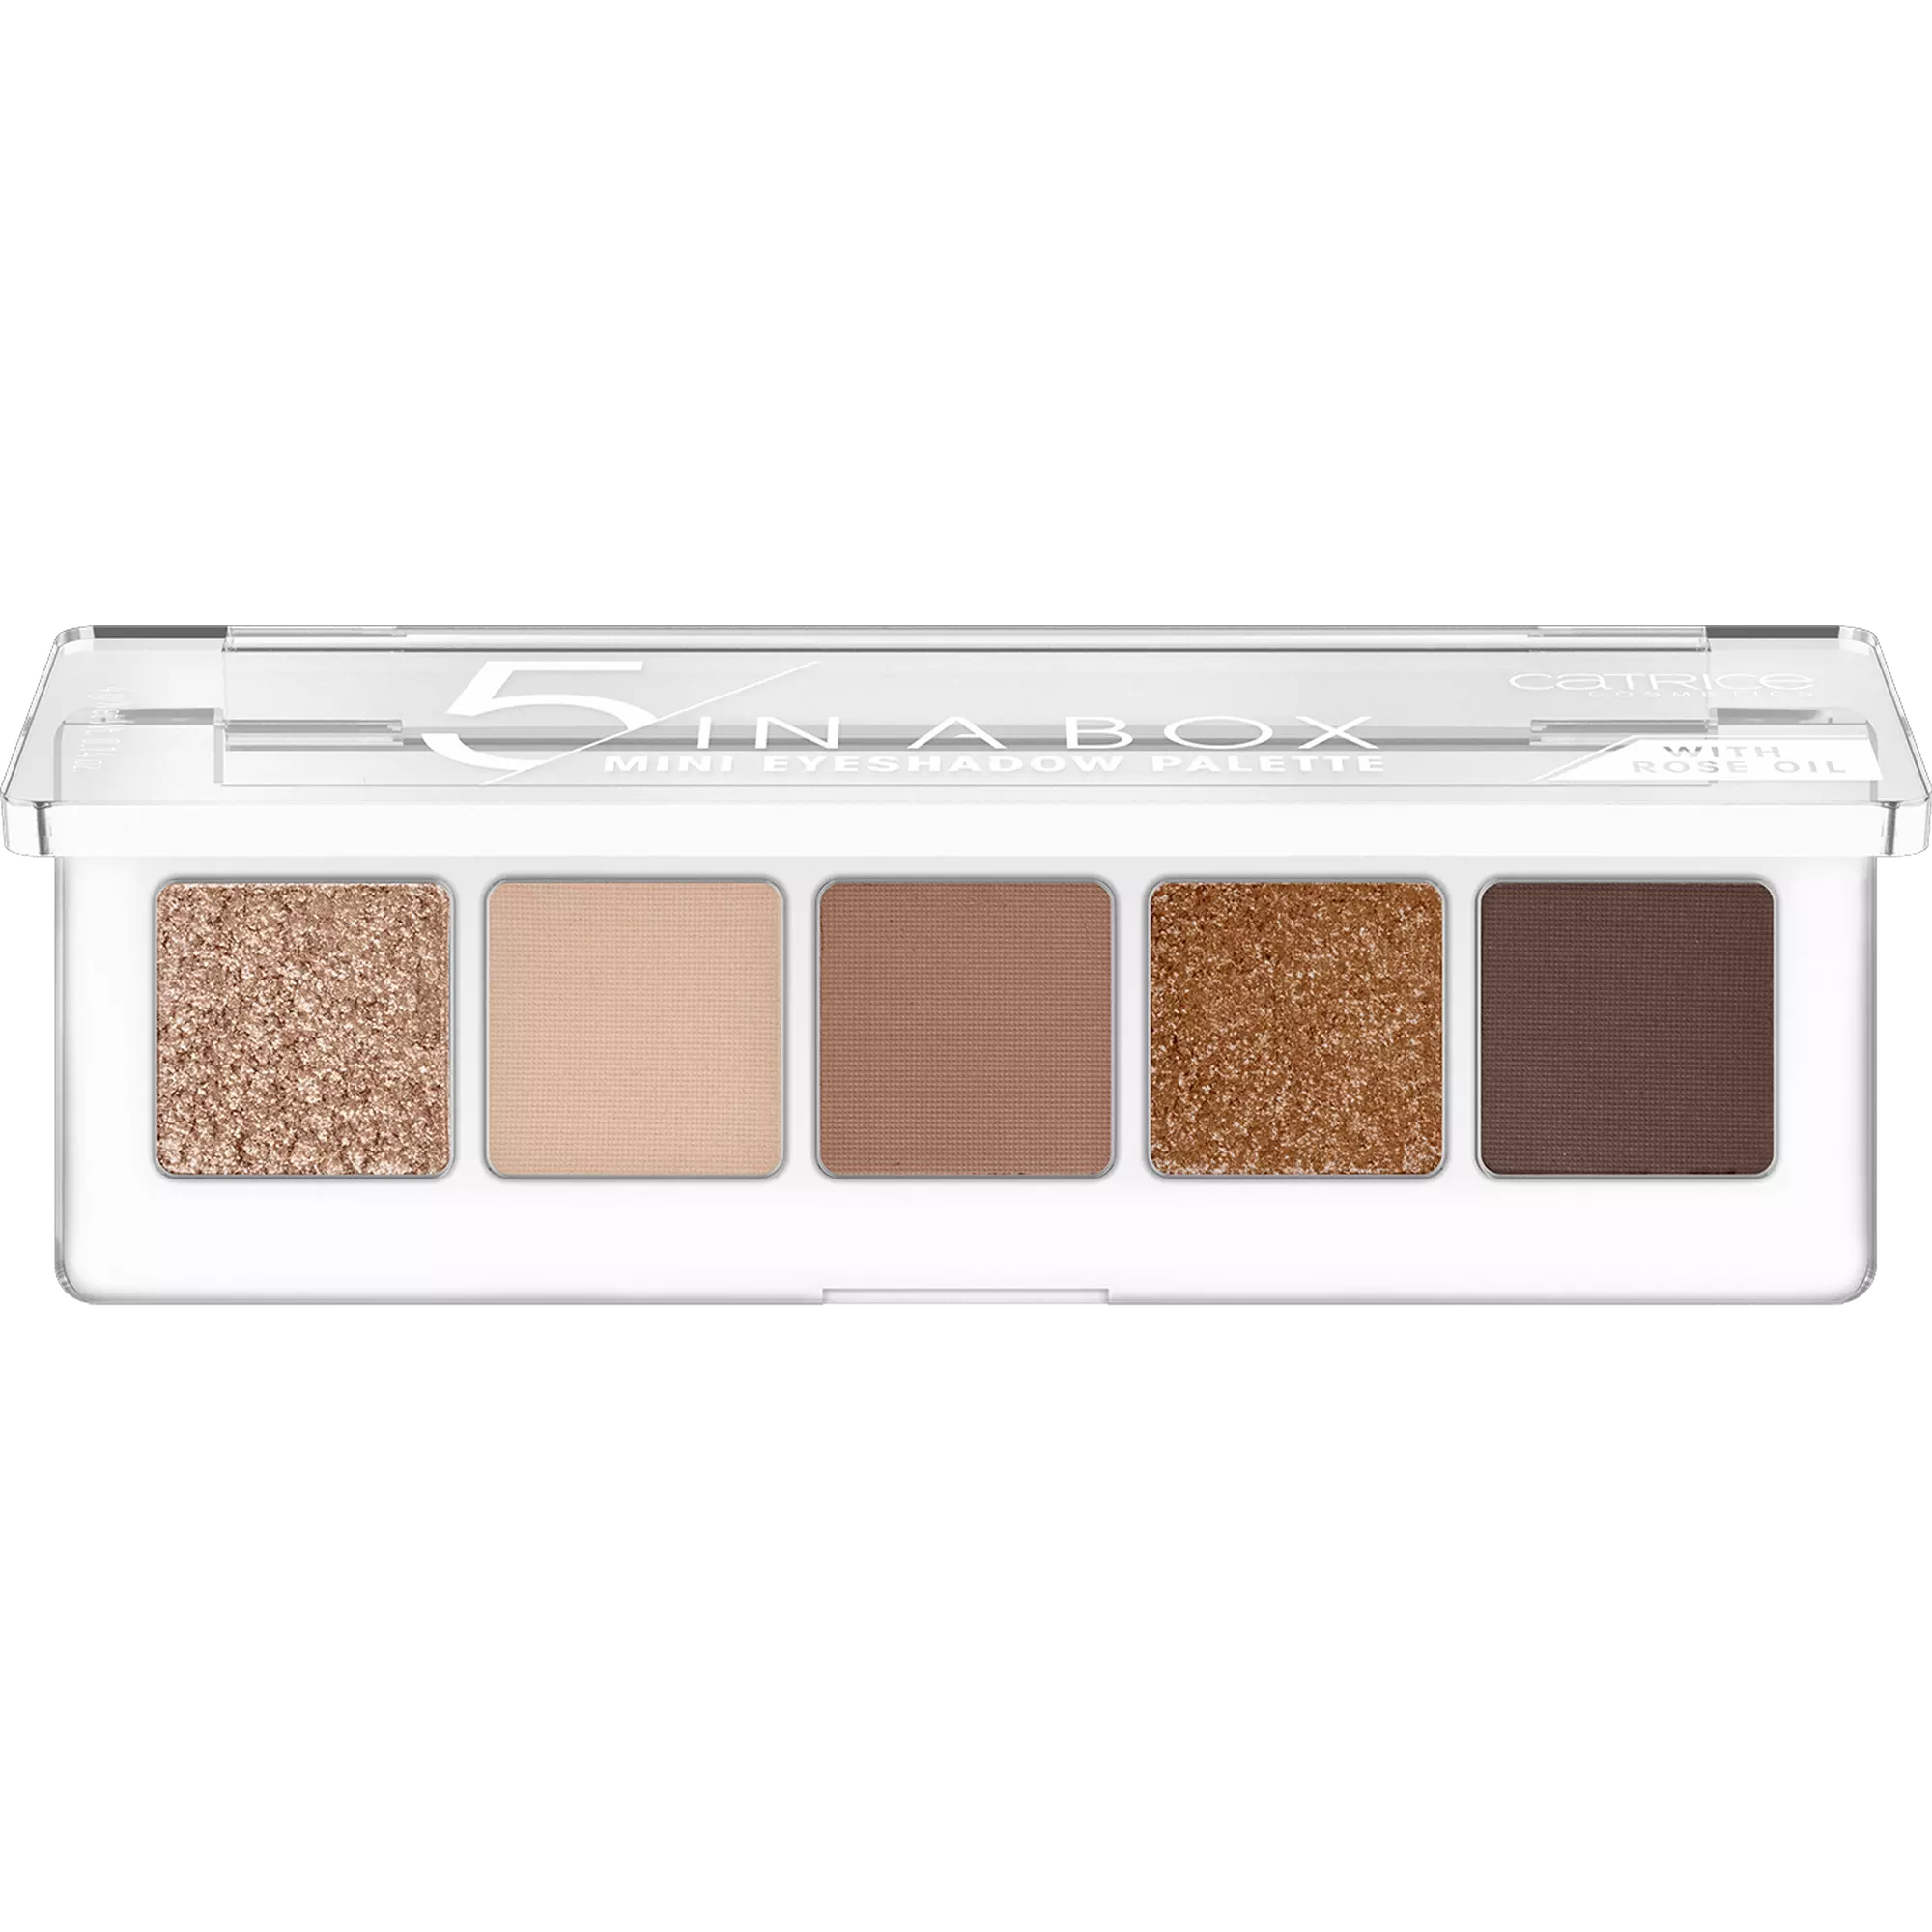 Catrice 5 In A Box Mini Eyeshadow Palette In Colour 010 Golden Nude Look